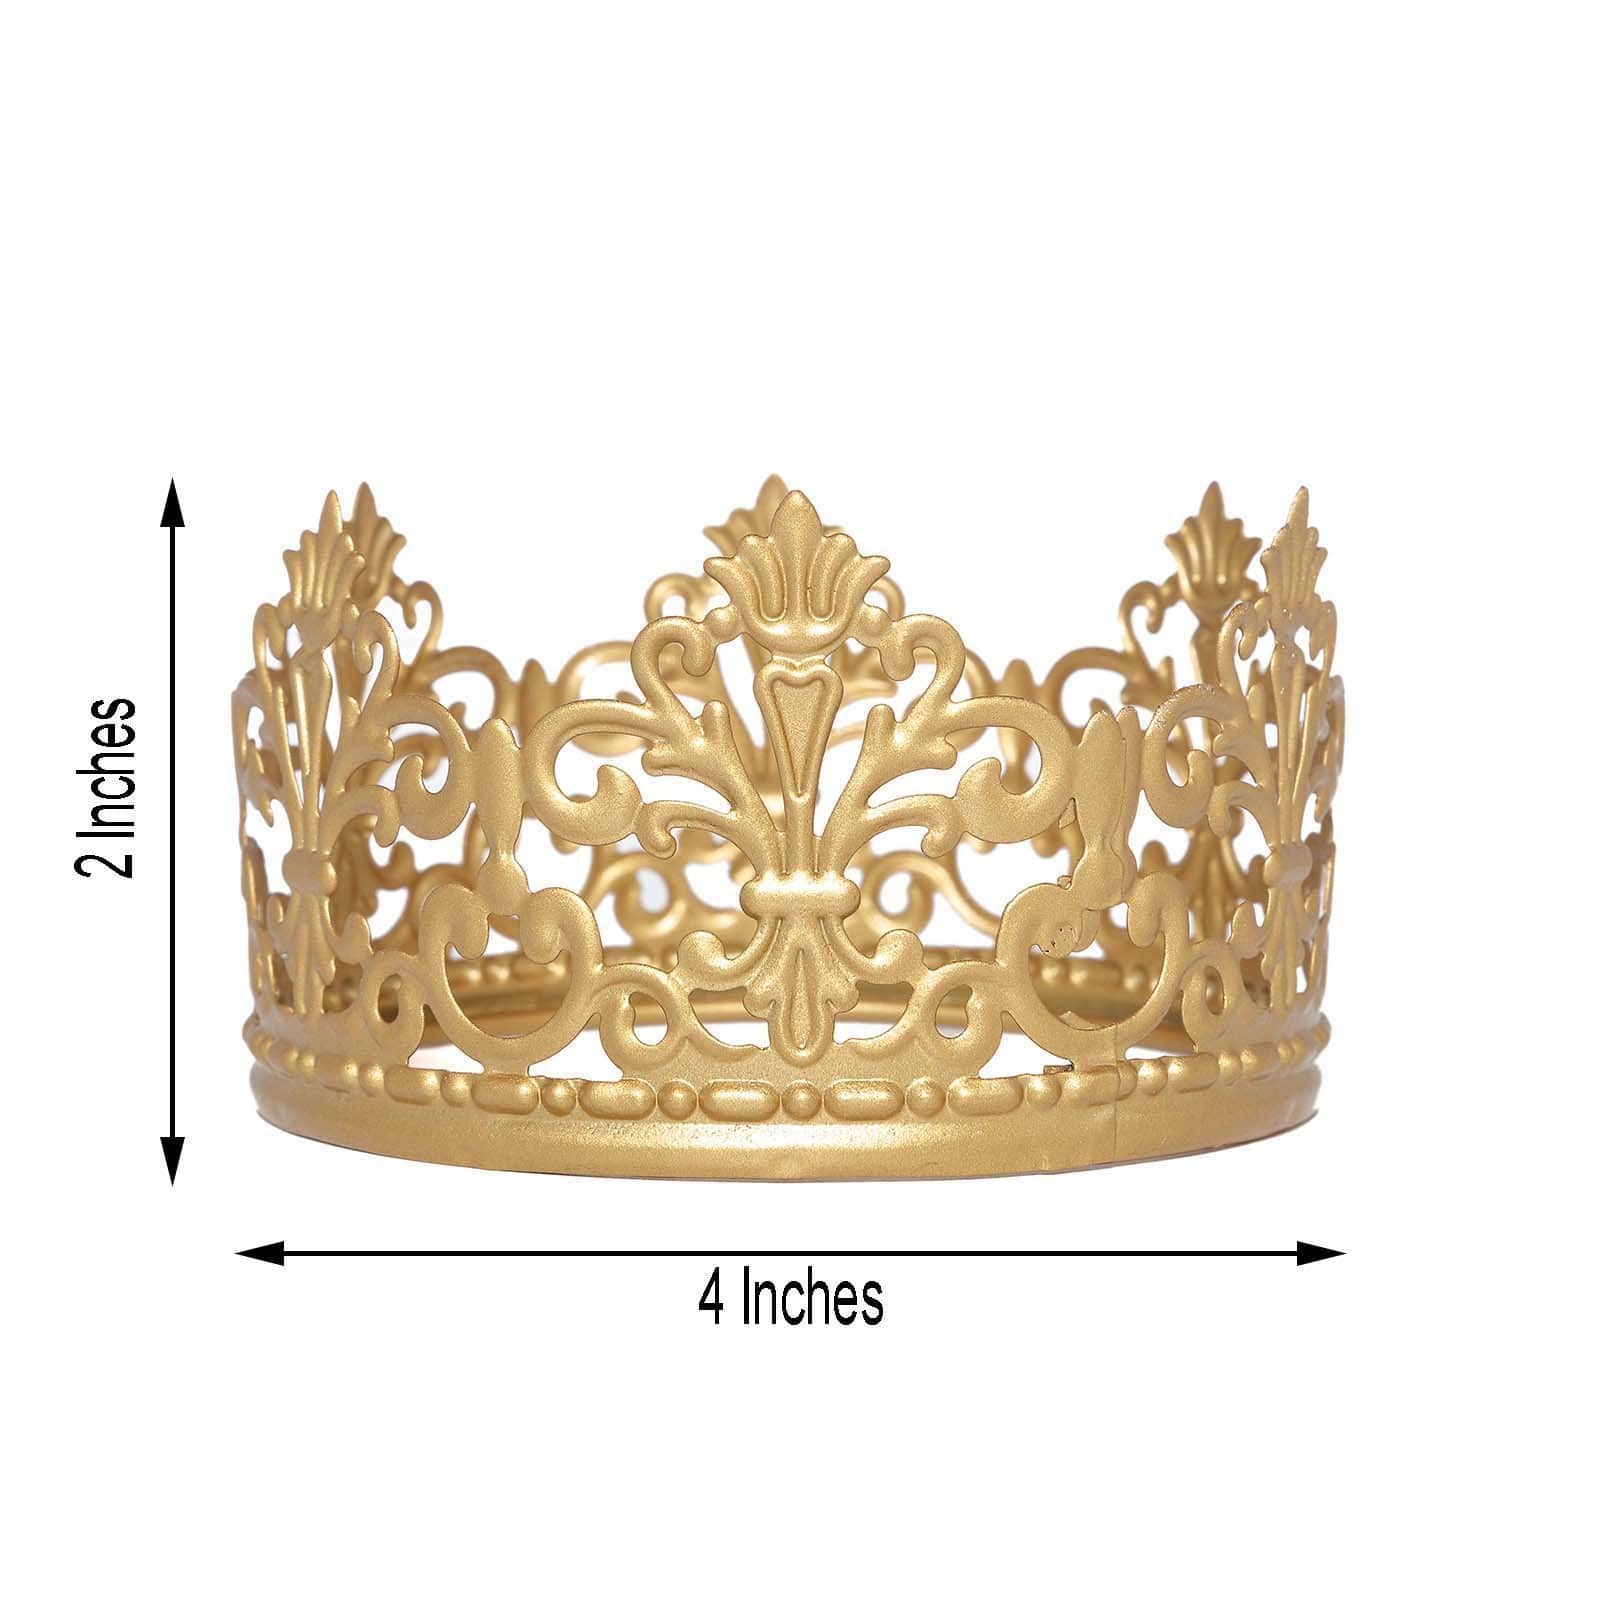 Metal Crown Cake Topper Princess Kids Birthday Party Decorations